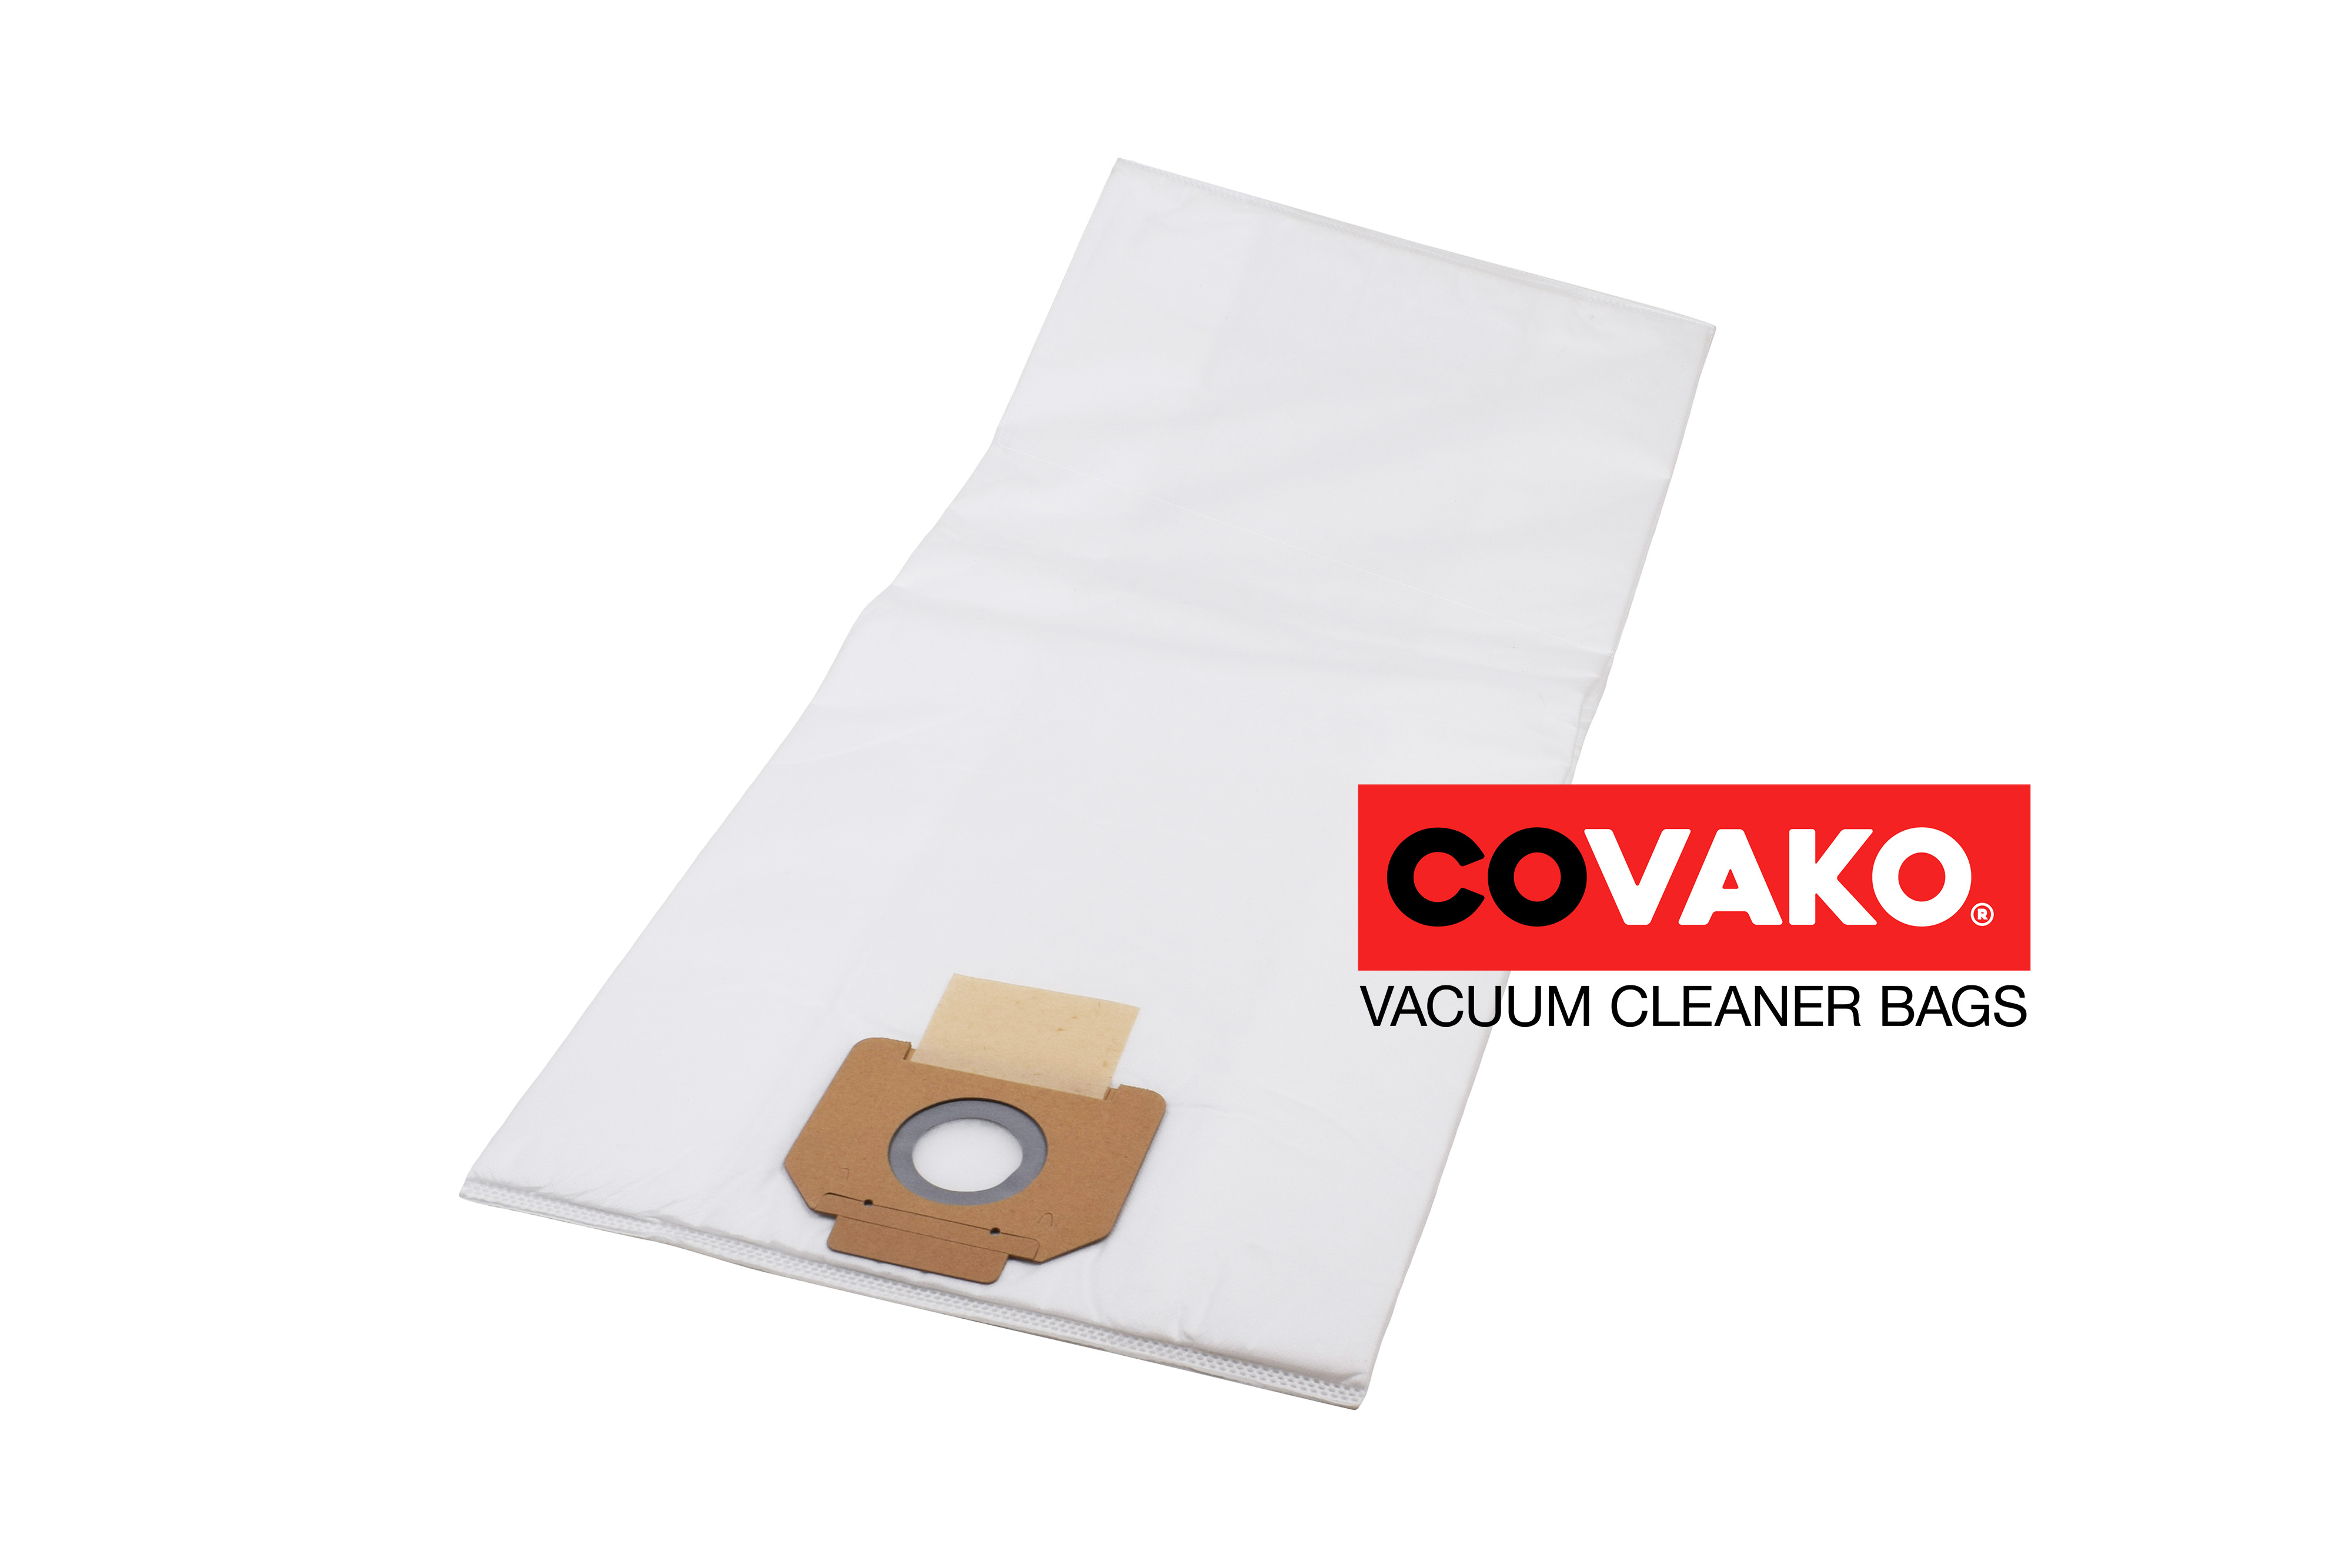 Gansow GS 2/62 W&D / Synthesis - Gansow vacuum cleaner bags